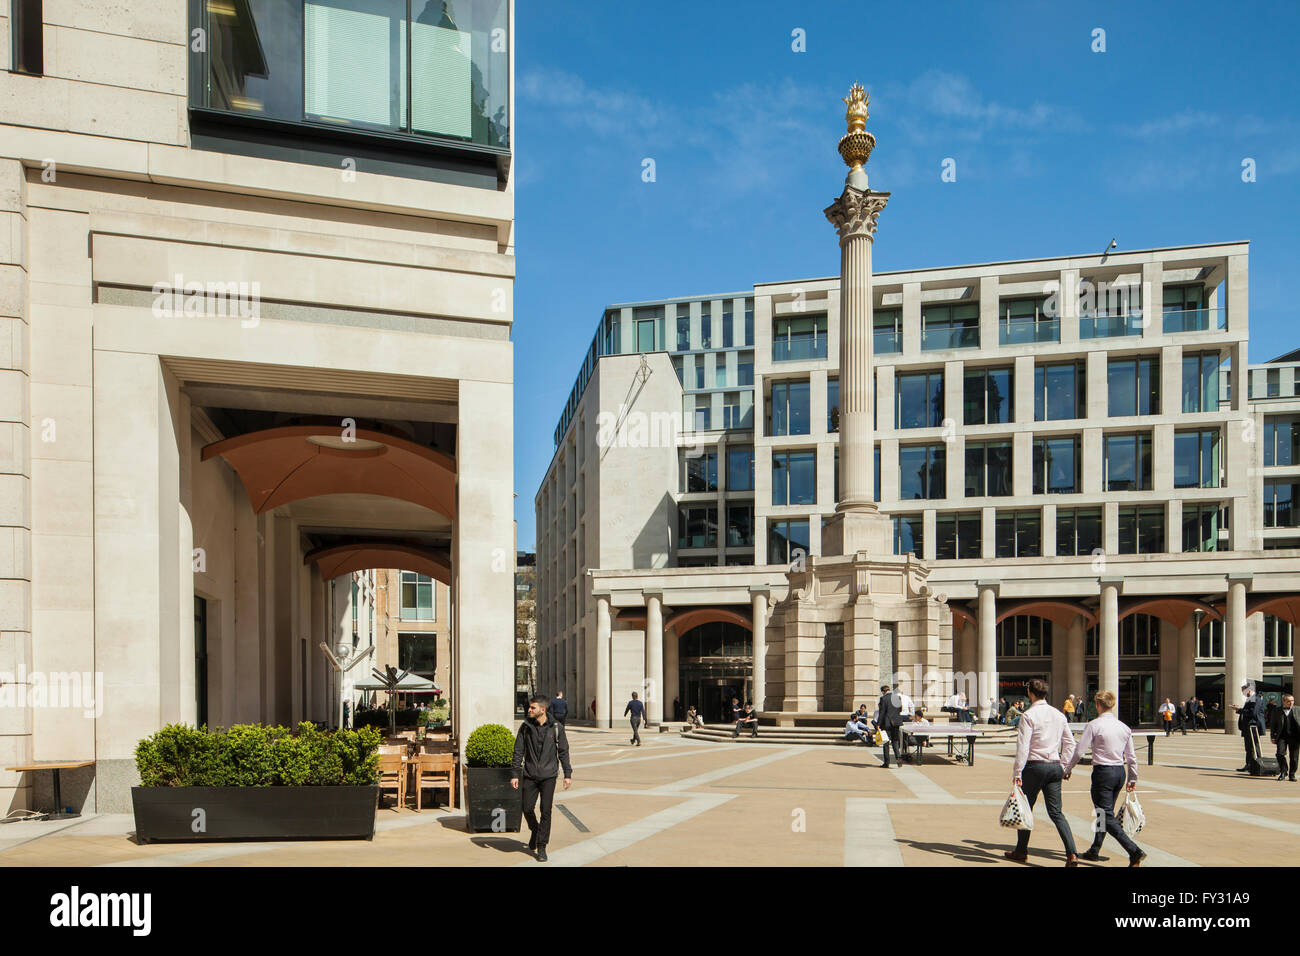 Frühlingstag am Paternoster Square in London, England. Stockfoto